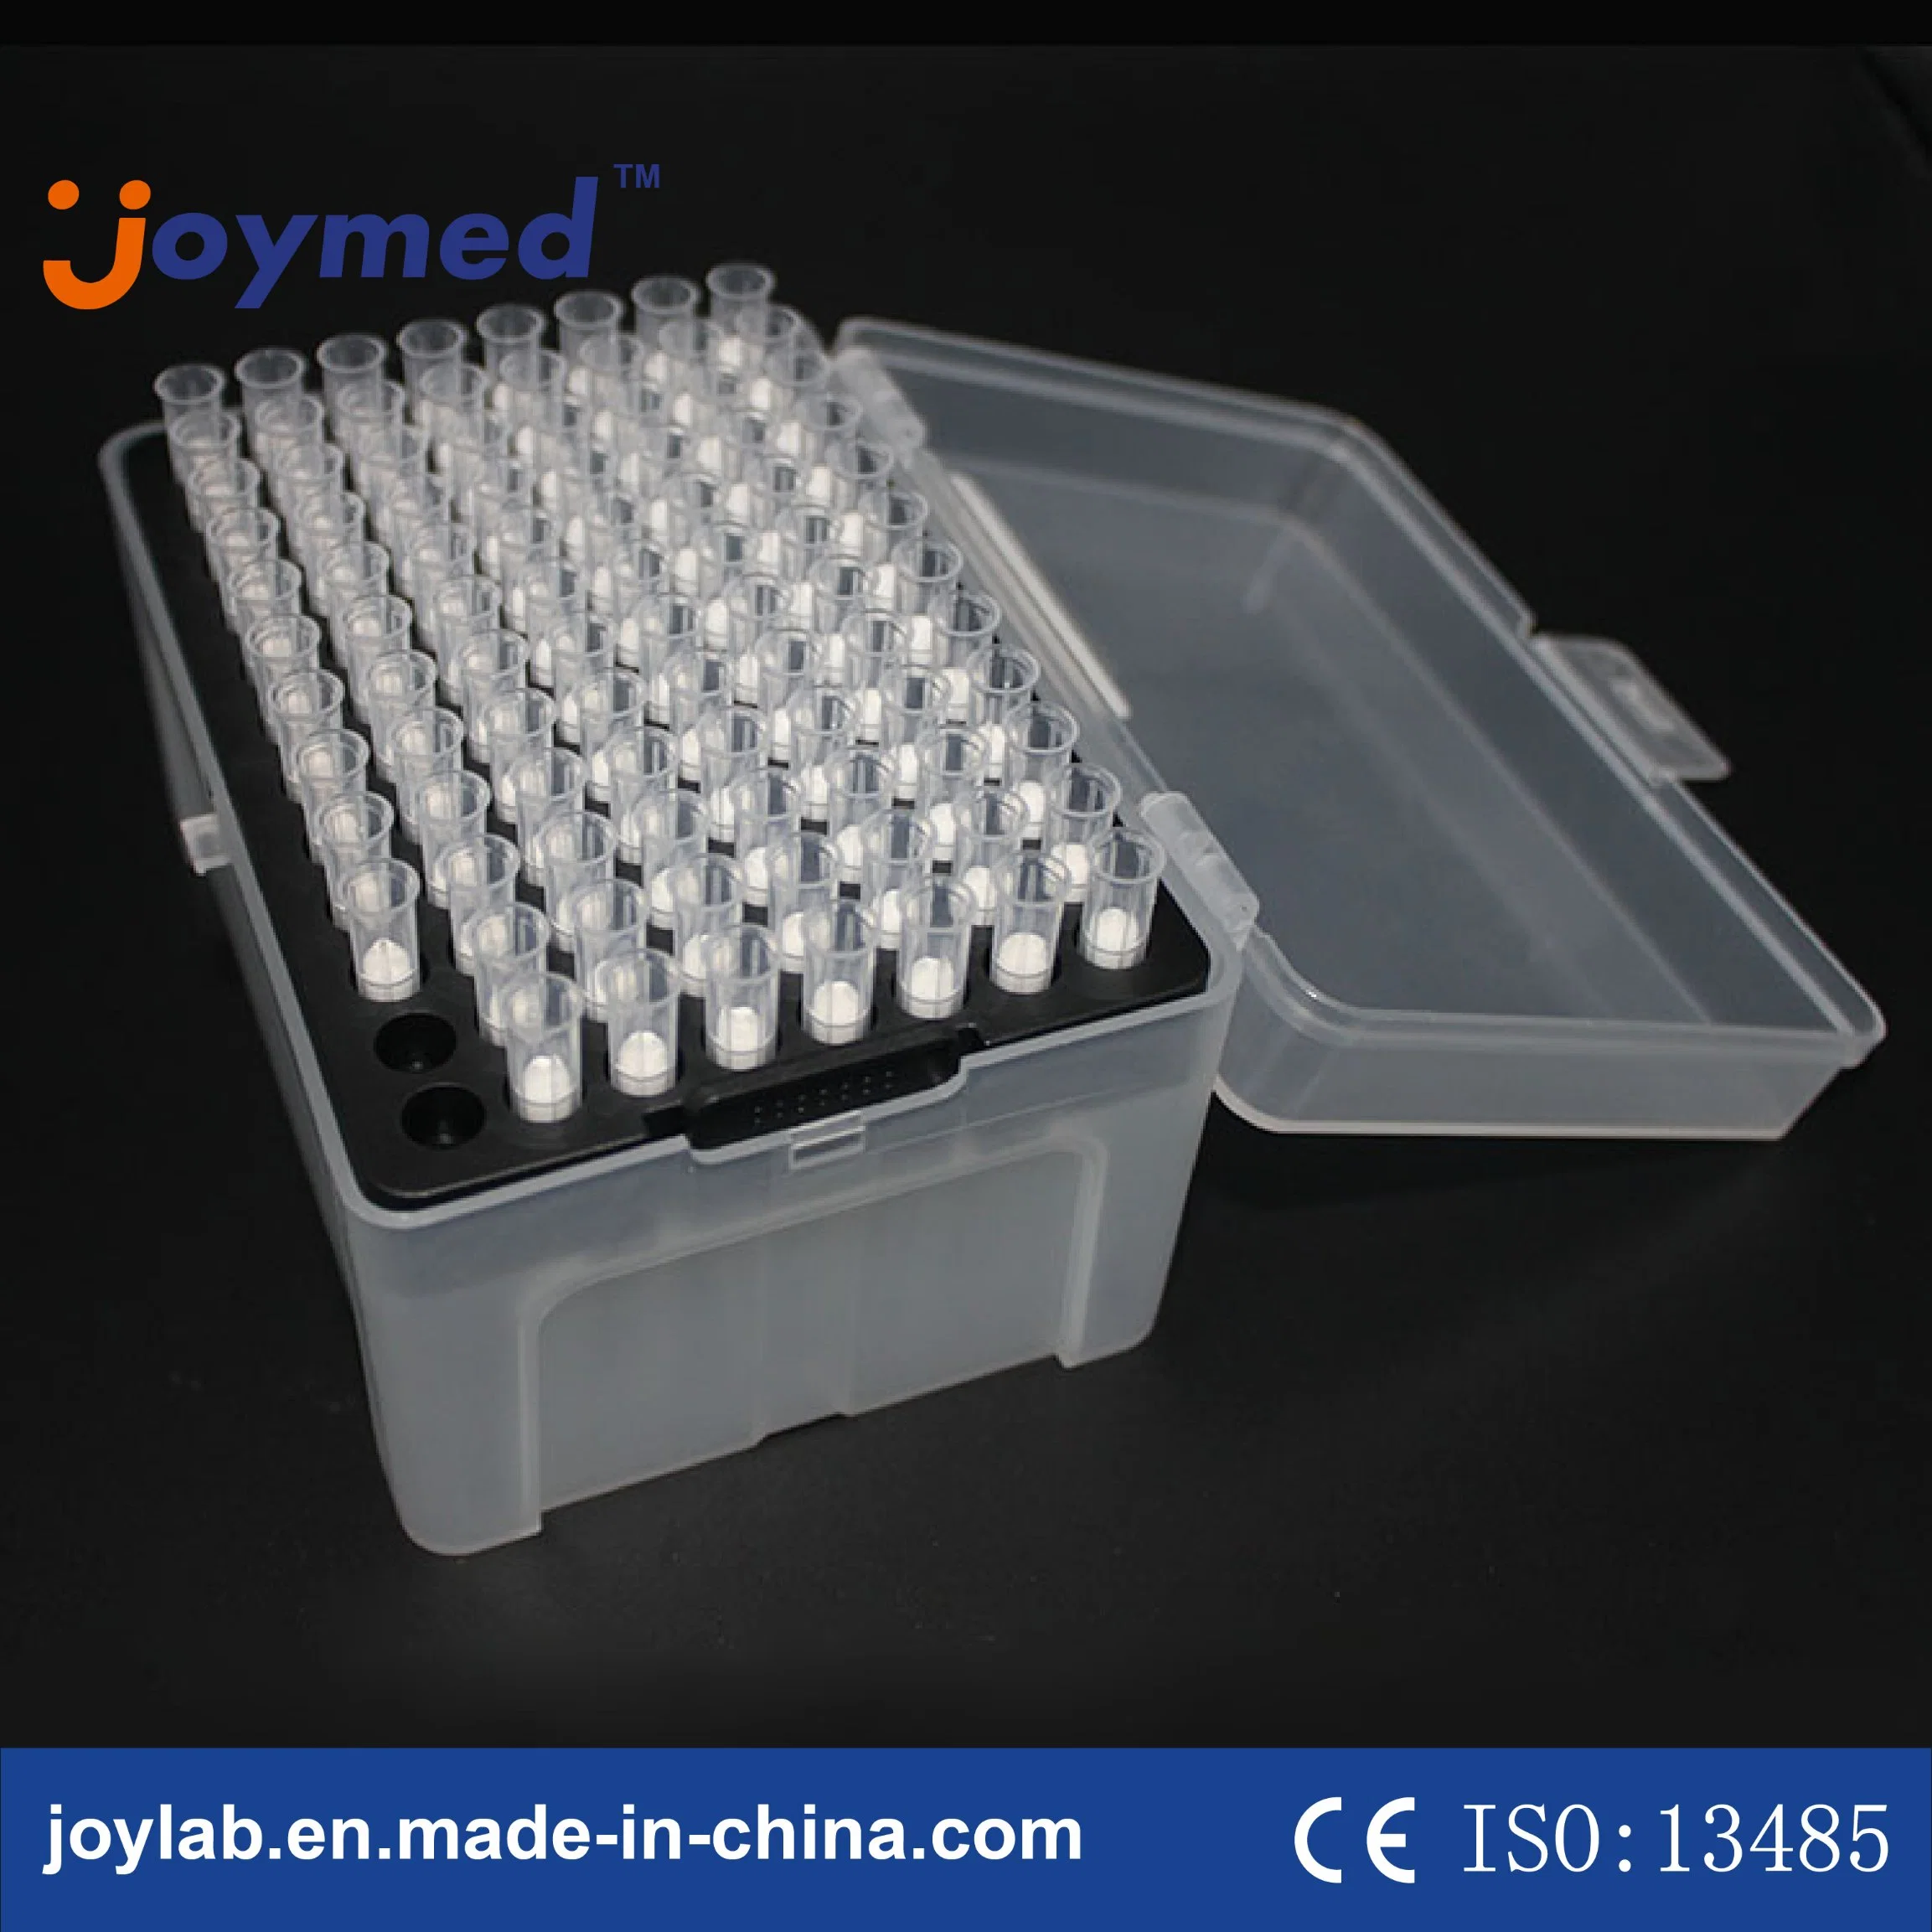 1000UL Filter Pipette Tips